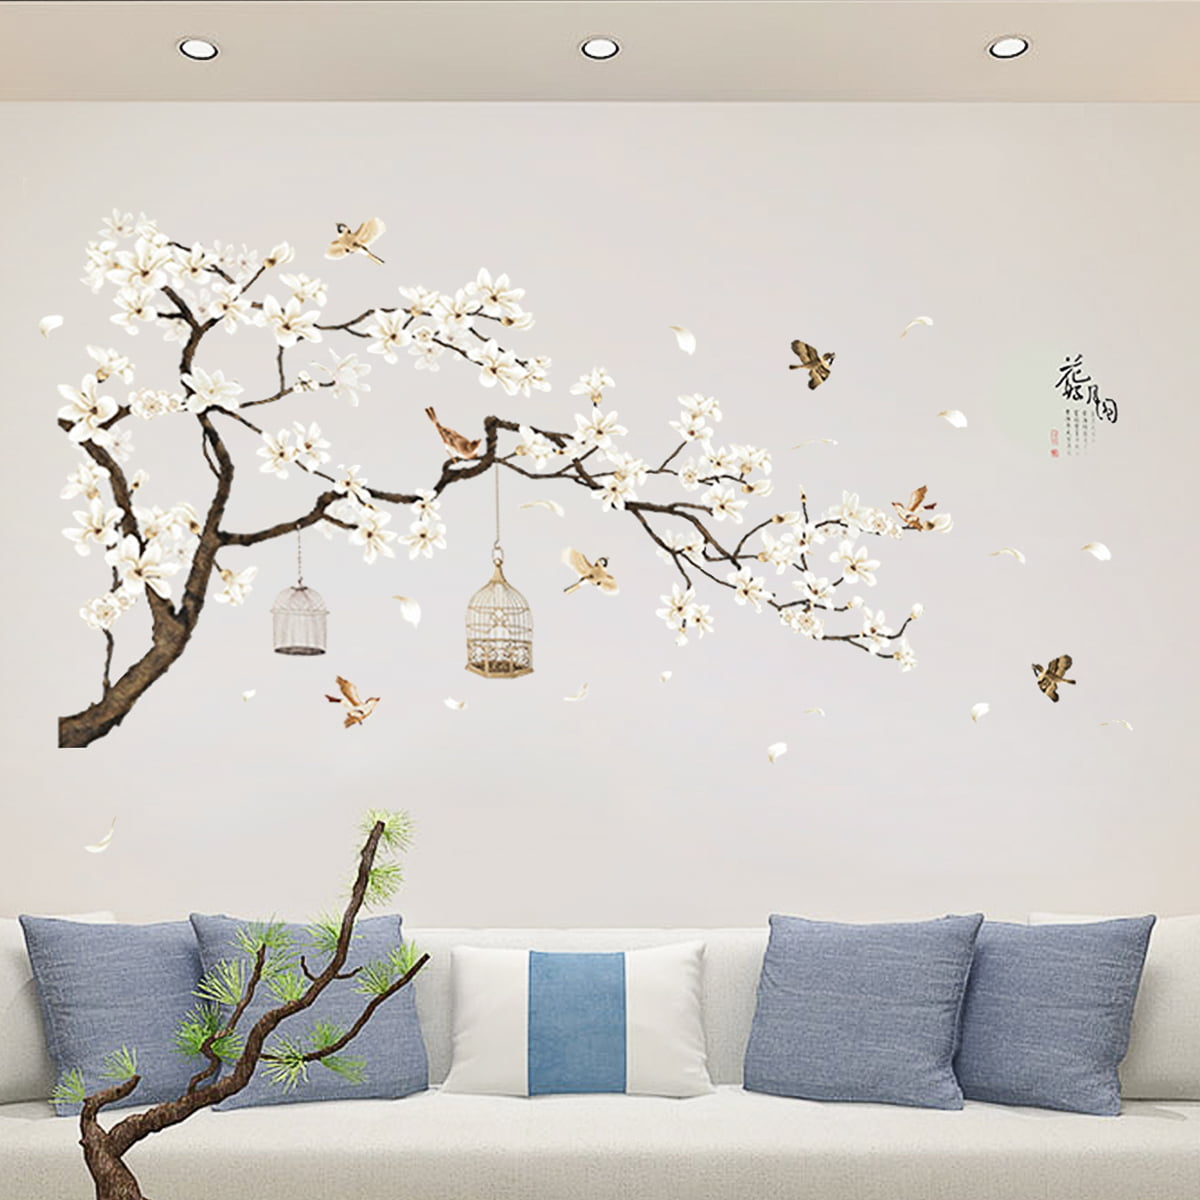 Details about  / Colorful Leaves 2 Wall Paper Wall Print Decal Wall Deco Indoor wall Murals Wall